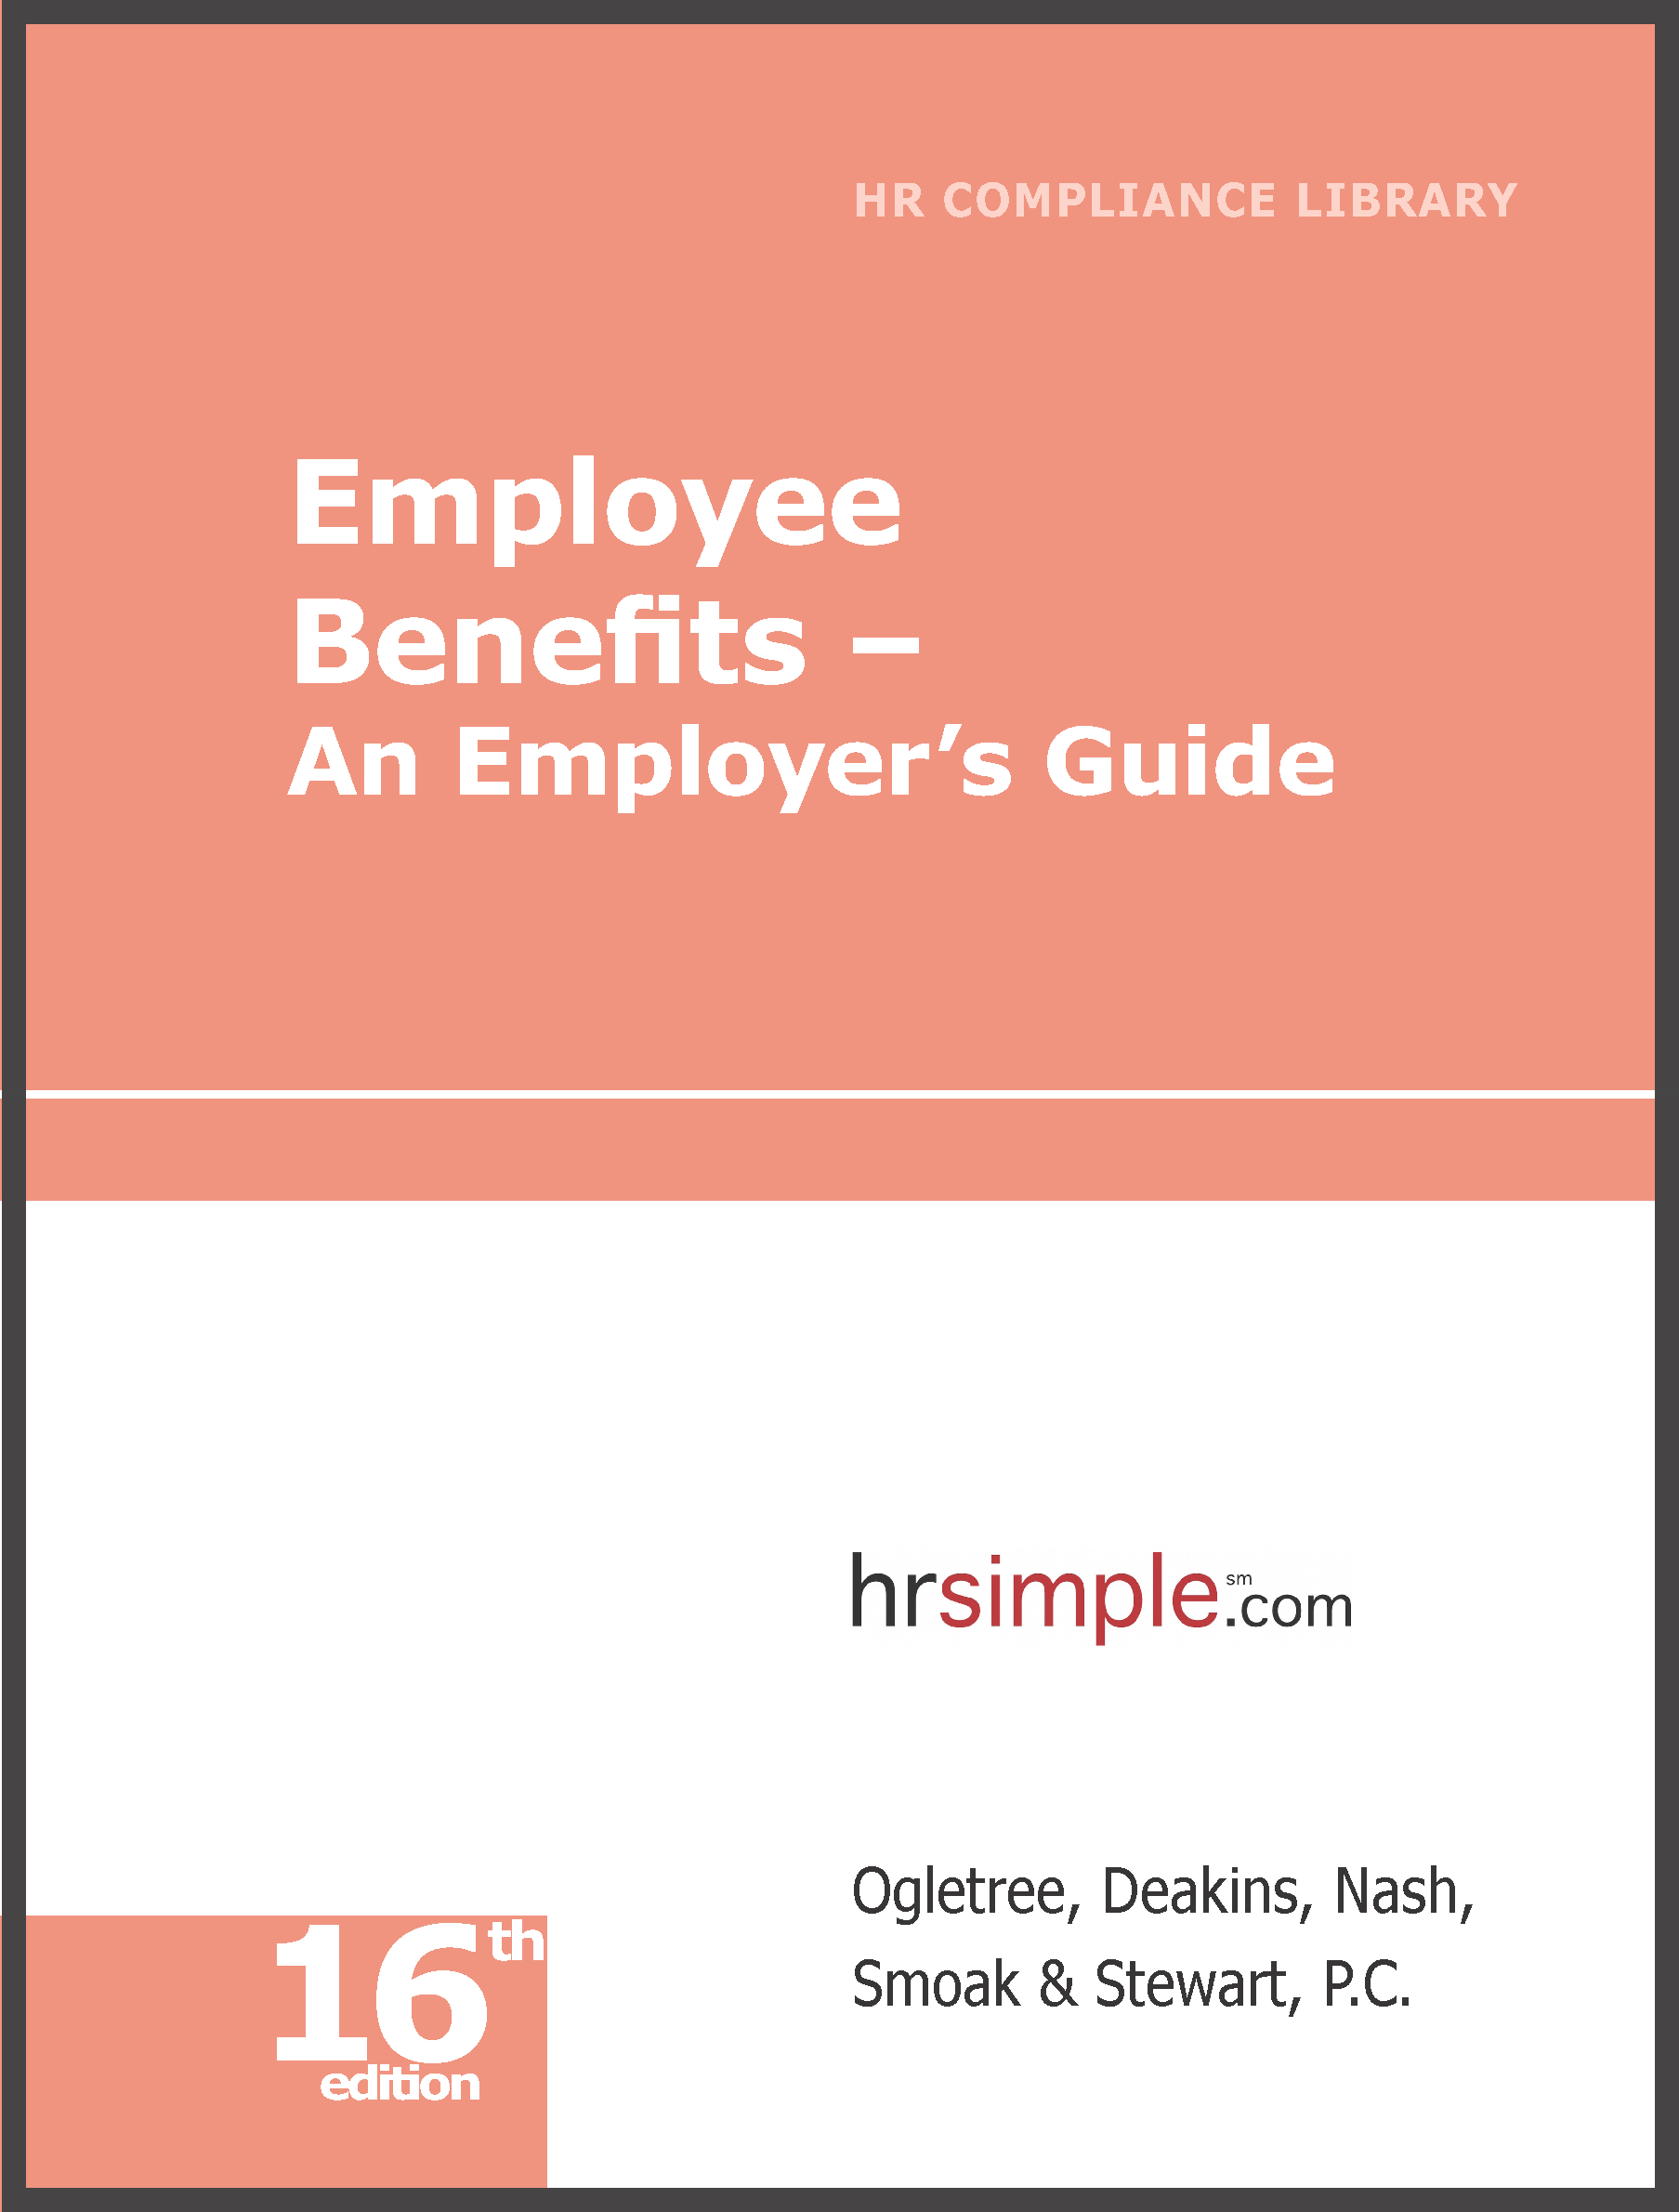 Employee Benefits — An Employer's Guide employment law image, remote work, labor laws, employment laws, right to work, order of protection, minimum wage